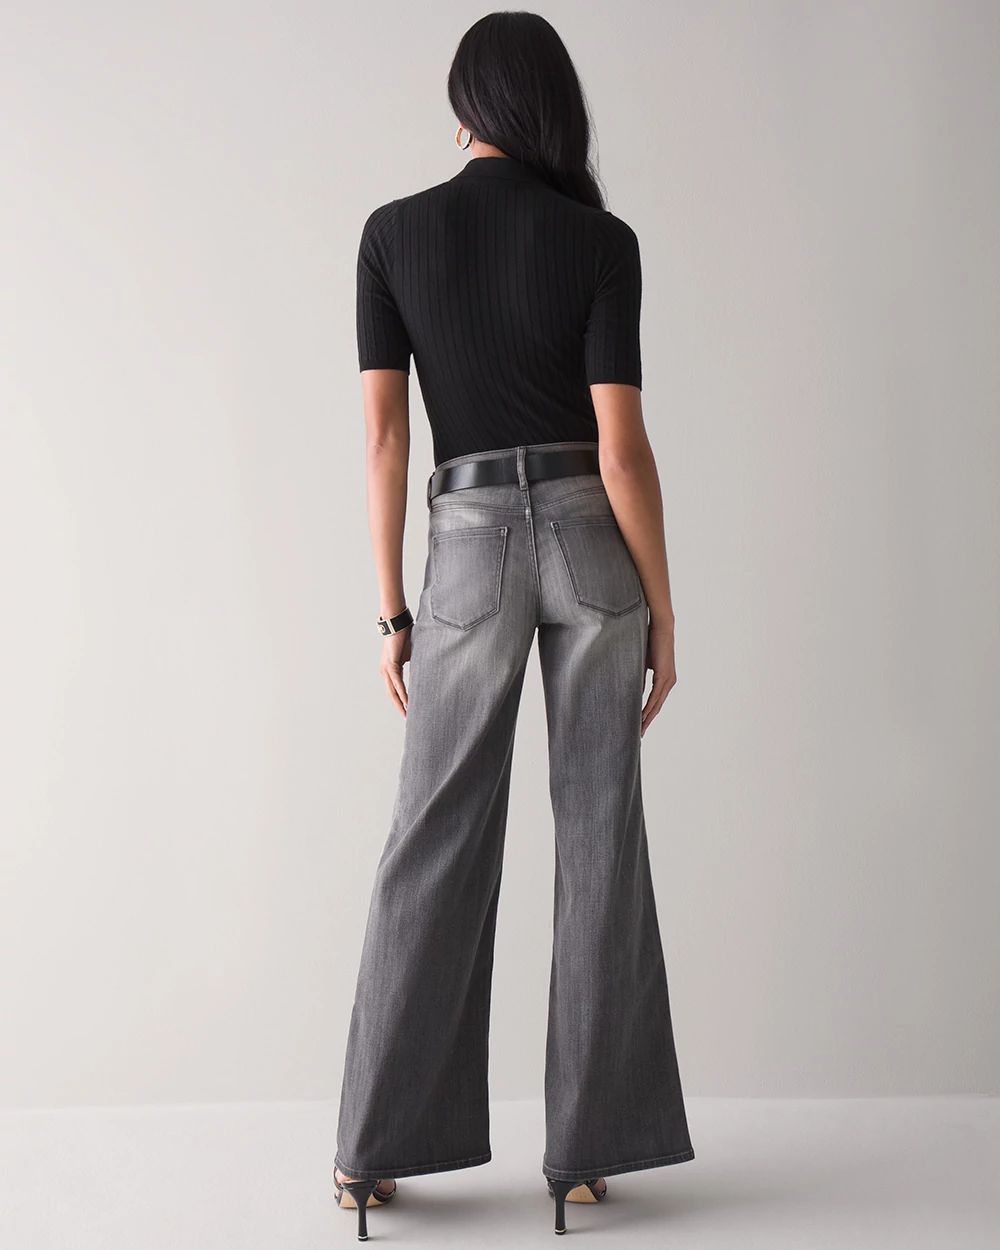 Petite High-Rise Wide Leg Jeans click to view larger image.